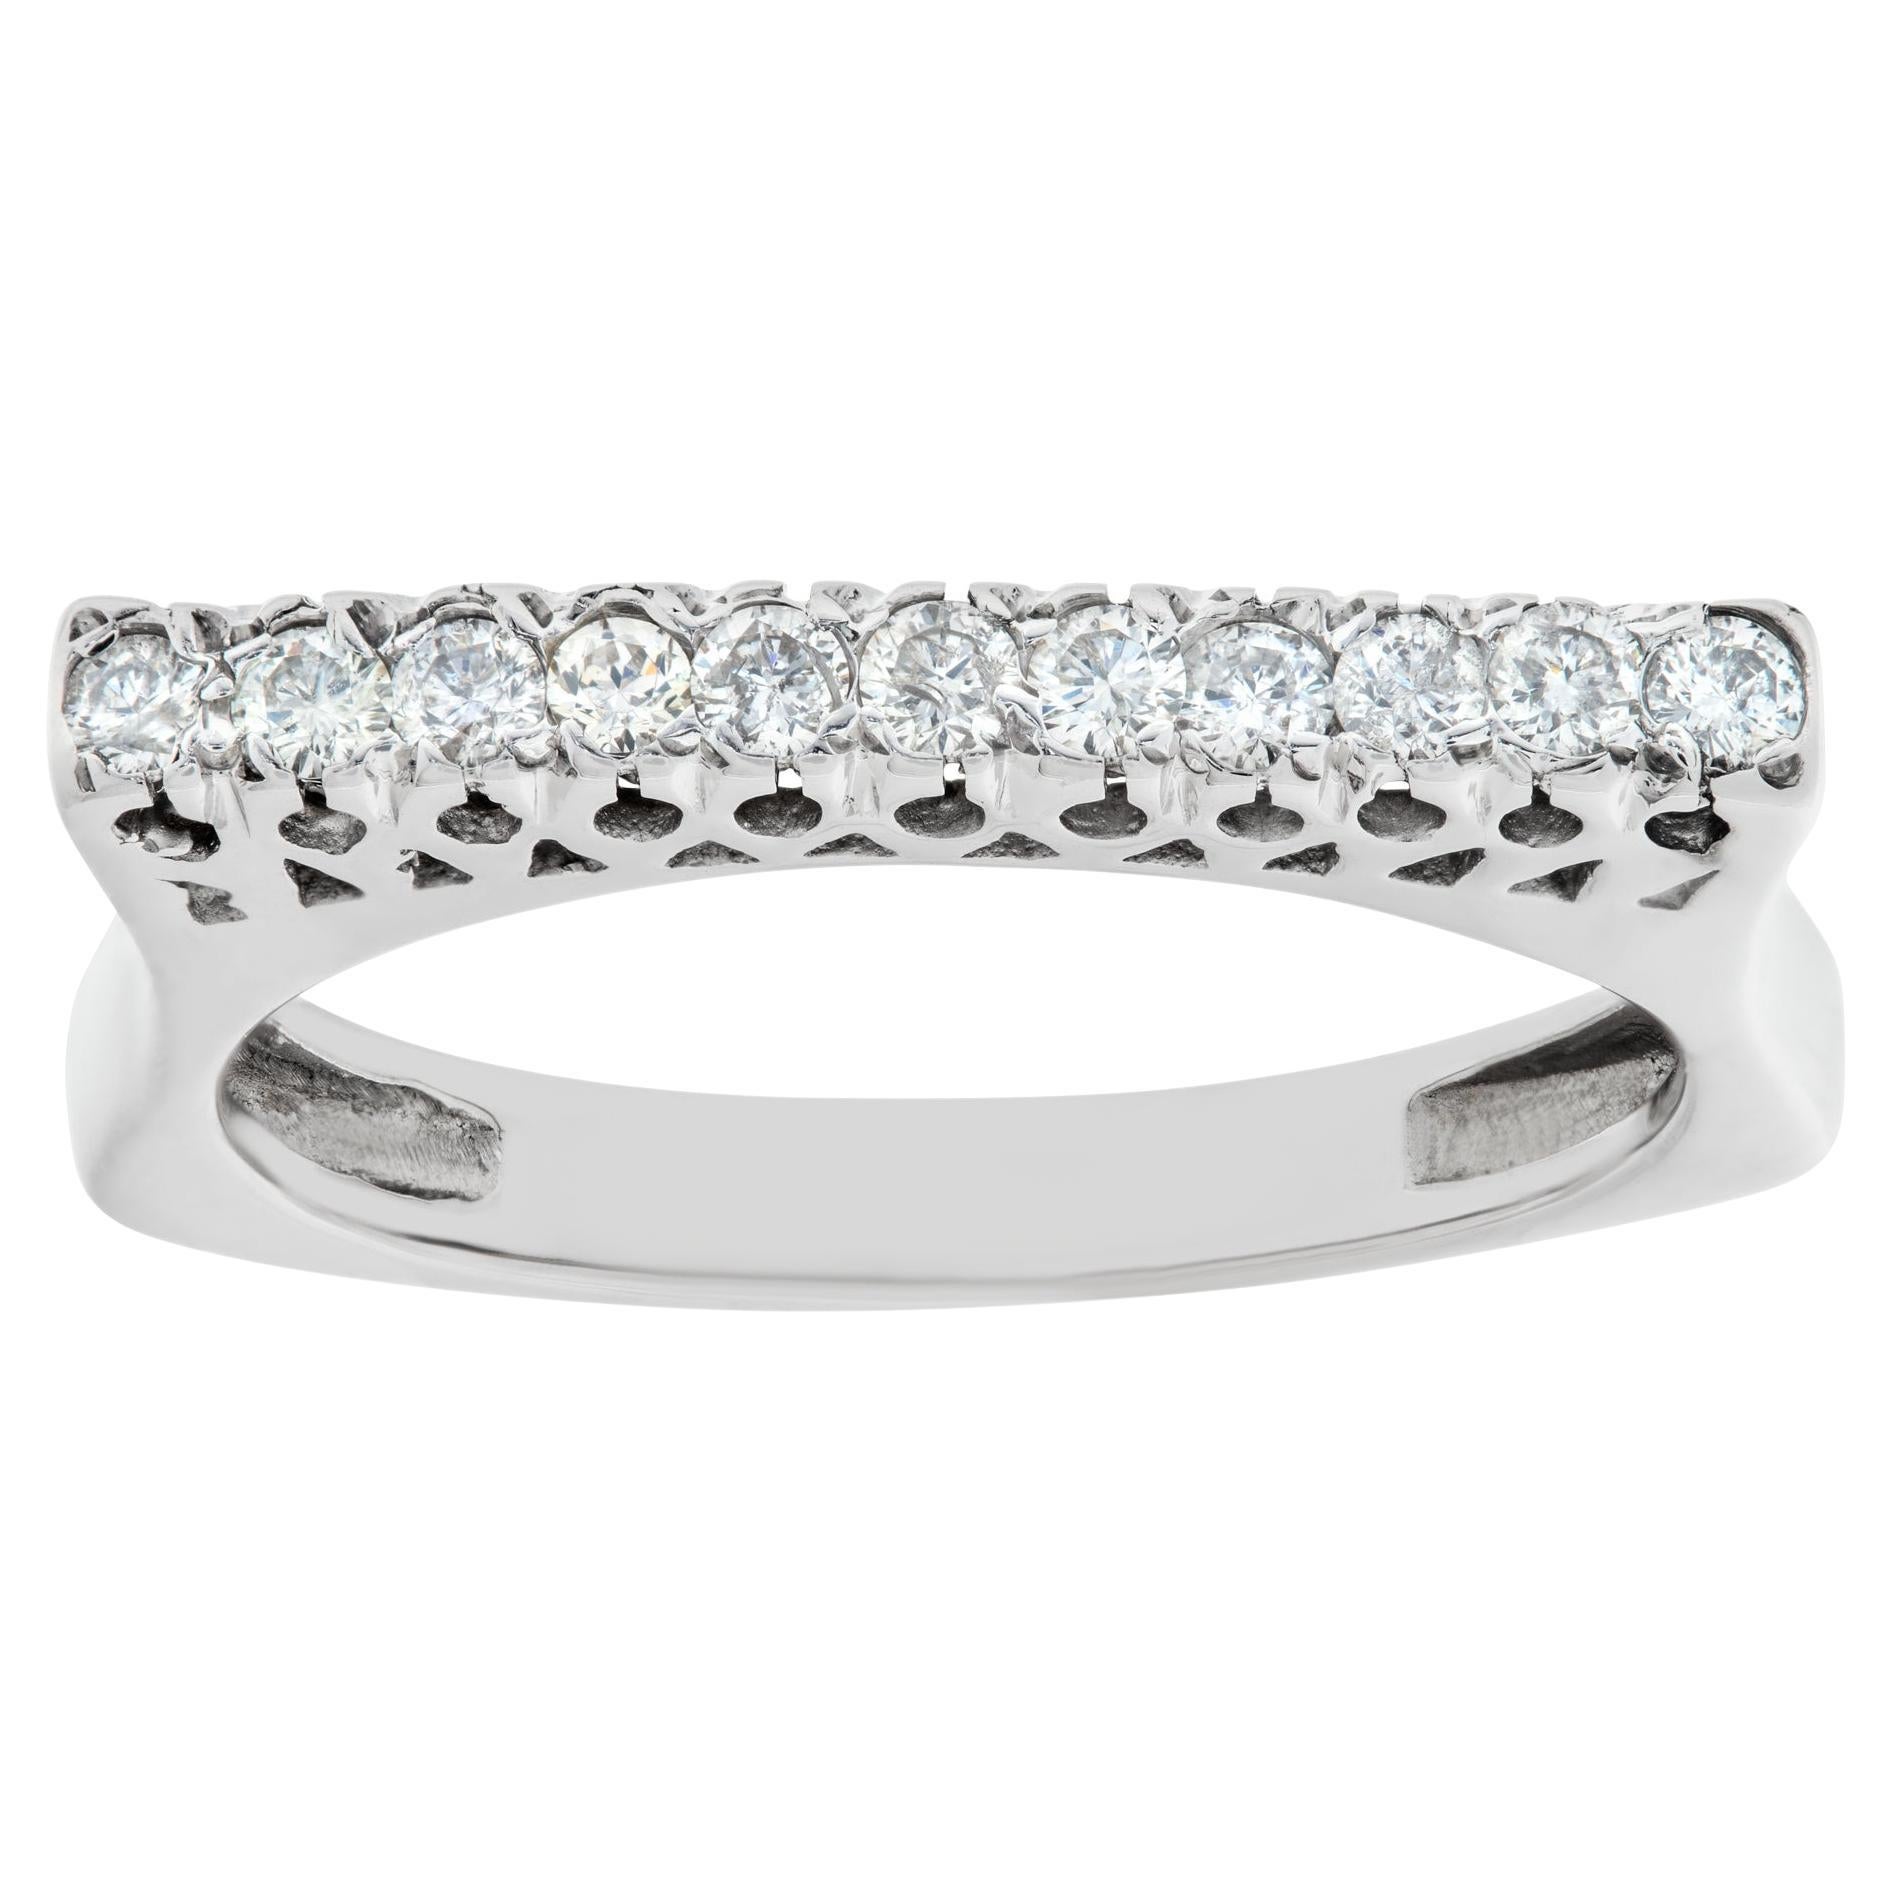 Single Row Diamond Ring in 18k White Gold, 0.33 Carat 'I-J Color, SI1 Clarity'  For Sale